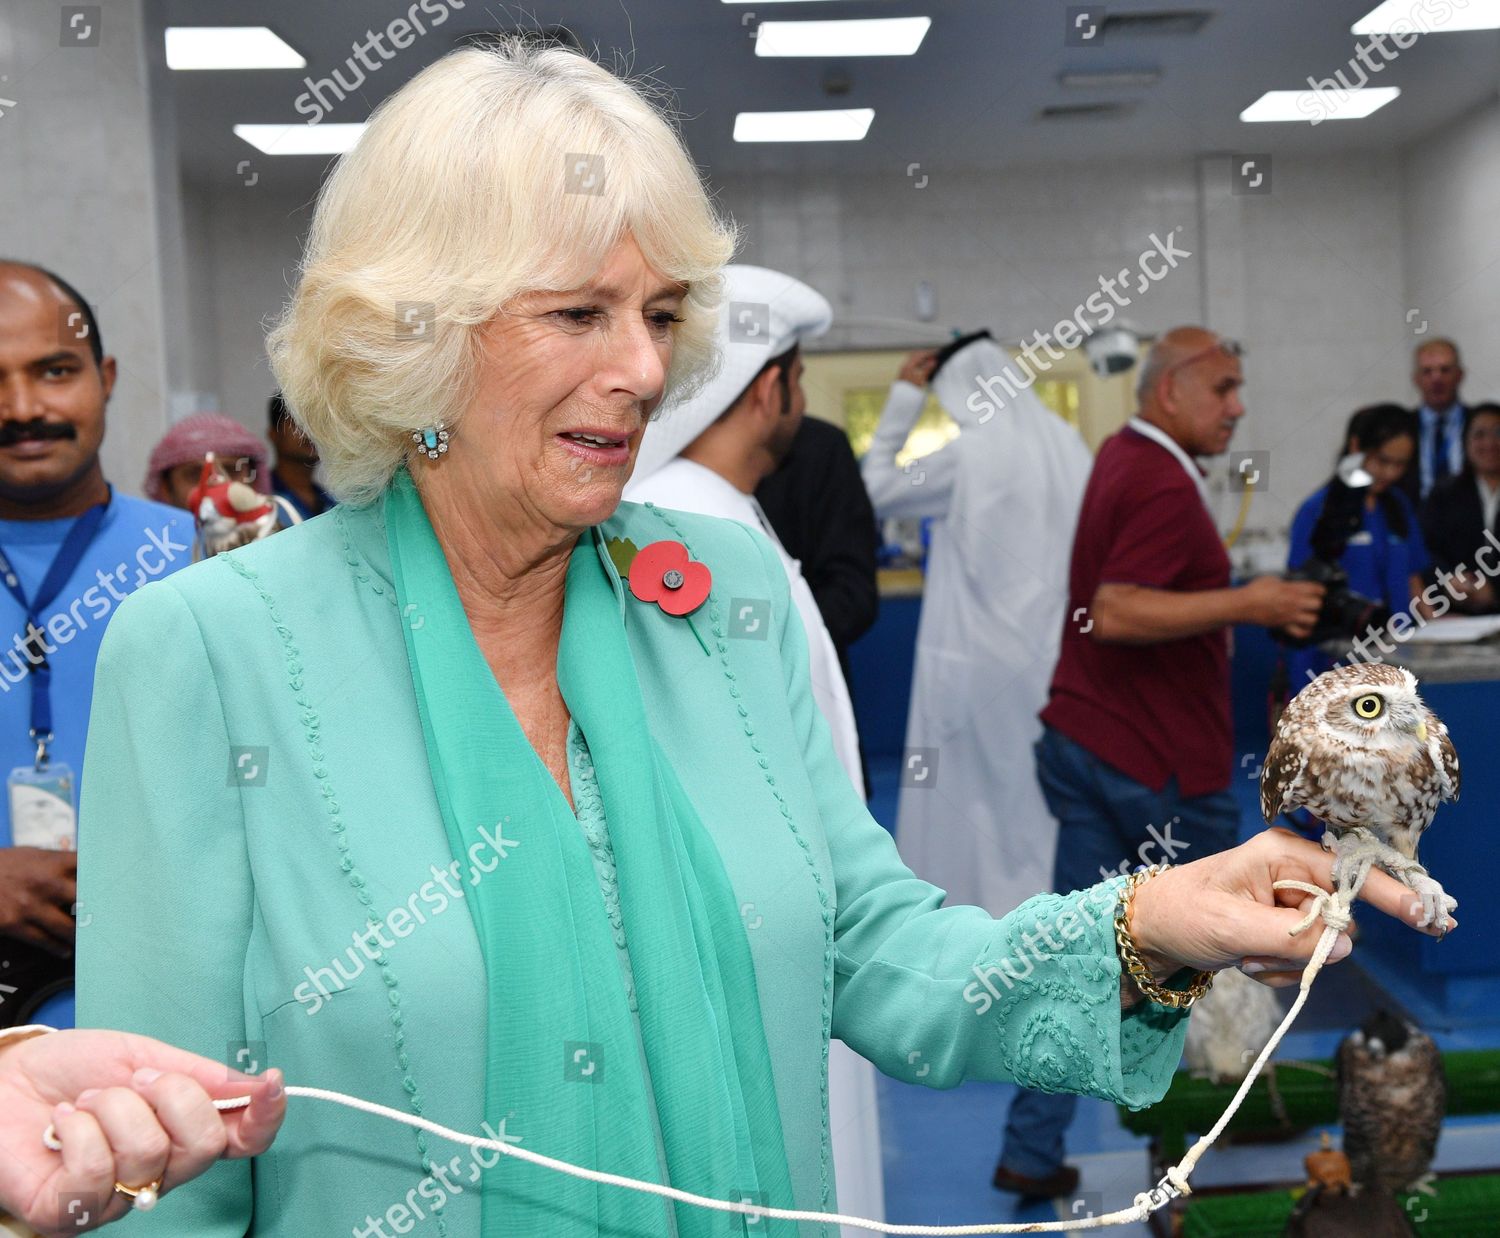 prince-charles-and-camilla-duchess-of-cornwall-visit-to-the-united-arab-emirates-shutterstock-editorial-7423101ar.jpg